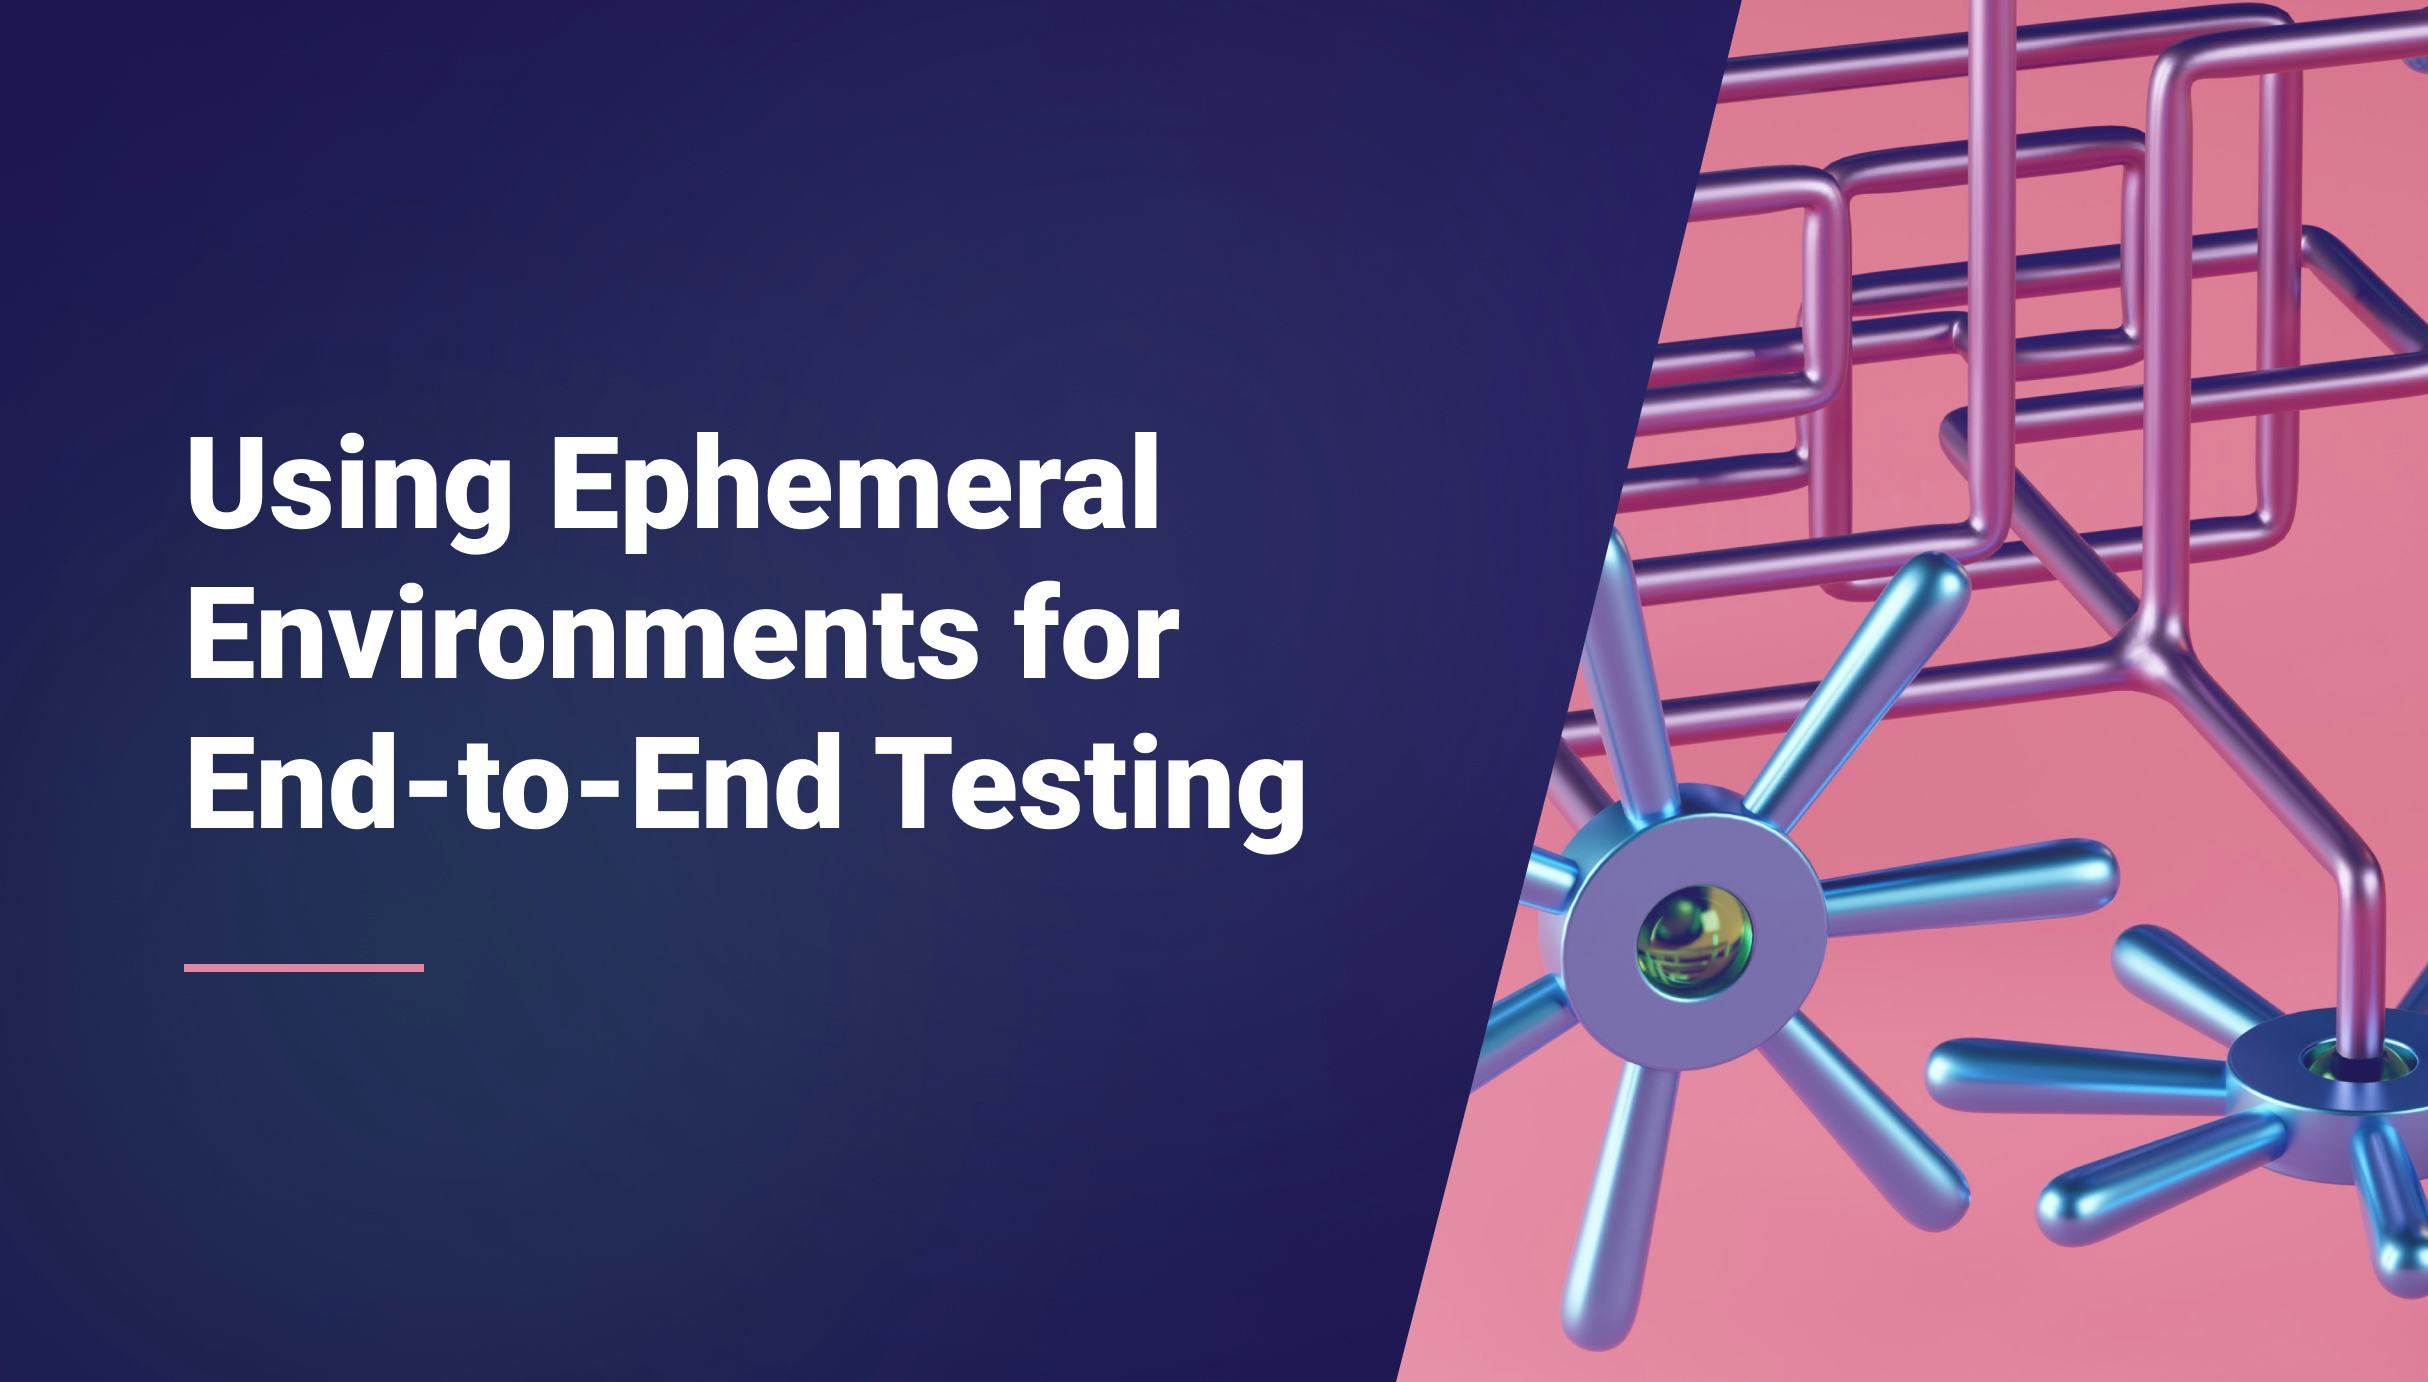 How to Use Ephemeral Environments for End-to-End Testing